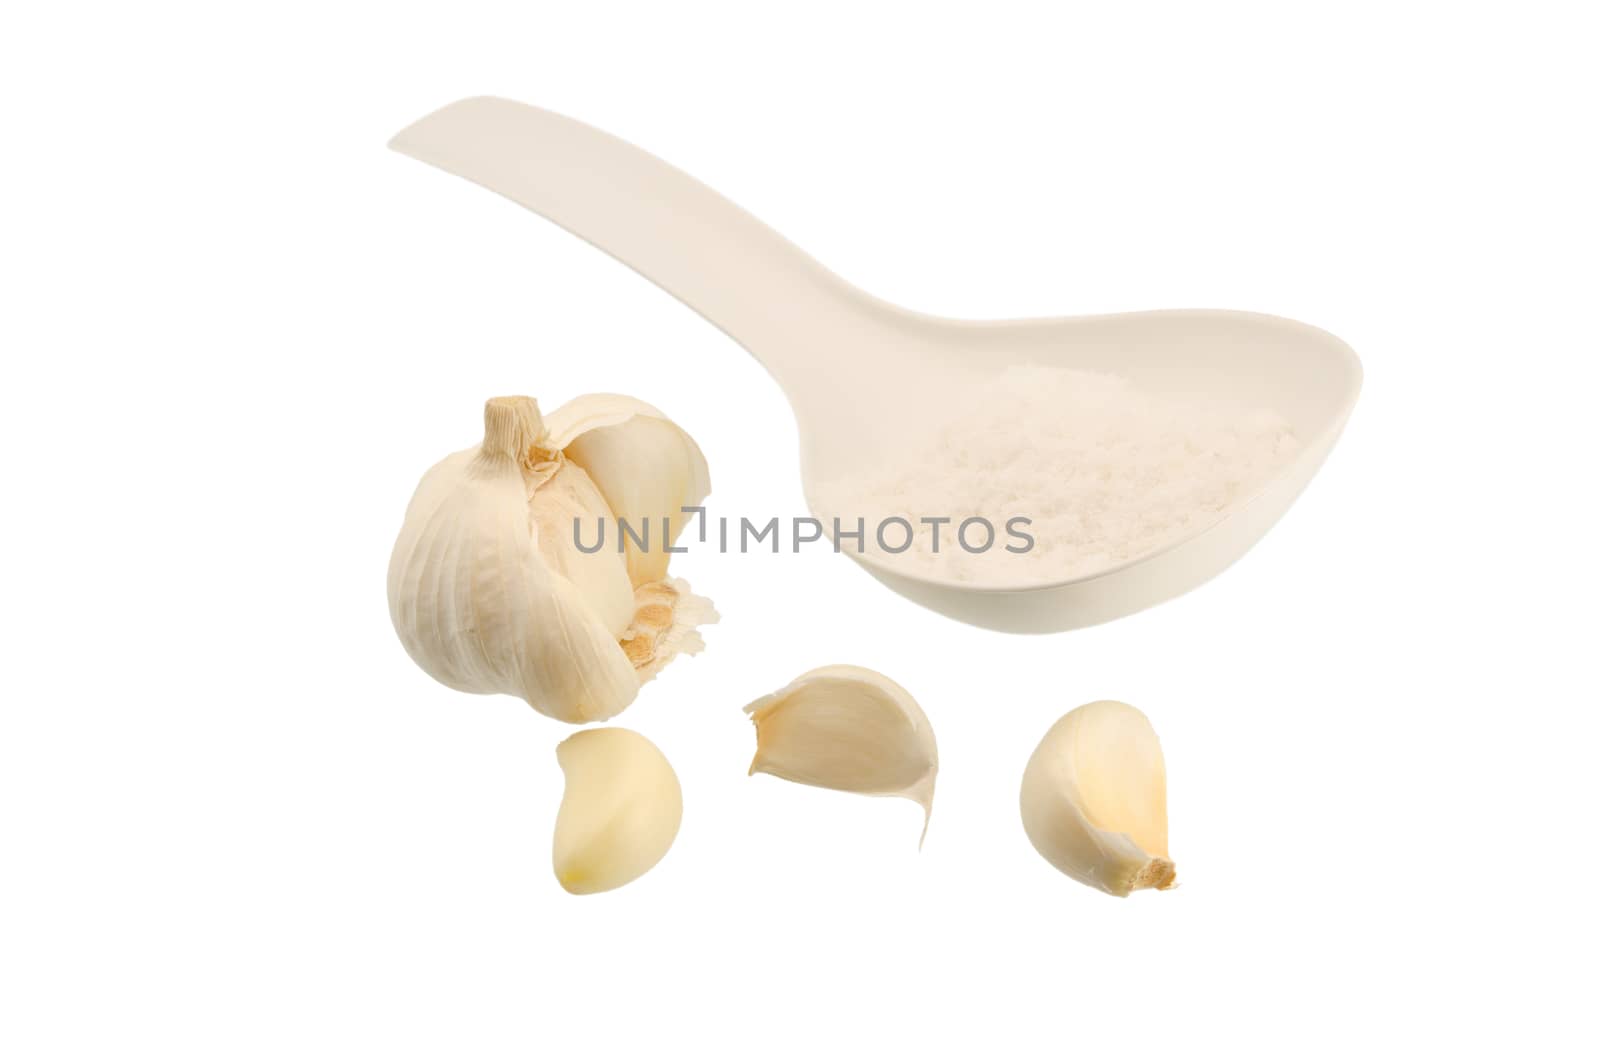 Garlic salt and spoon on a white background